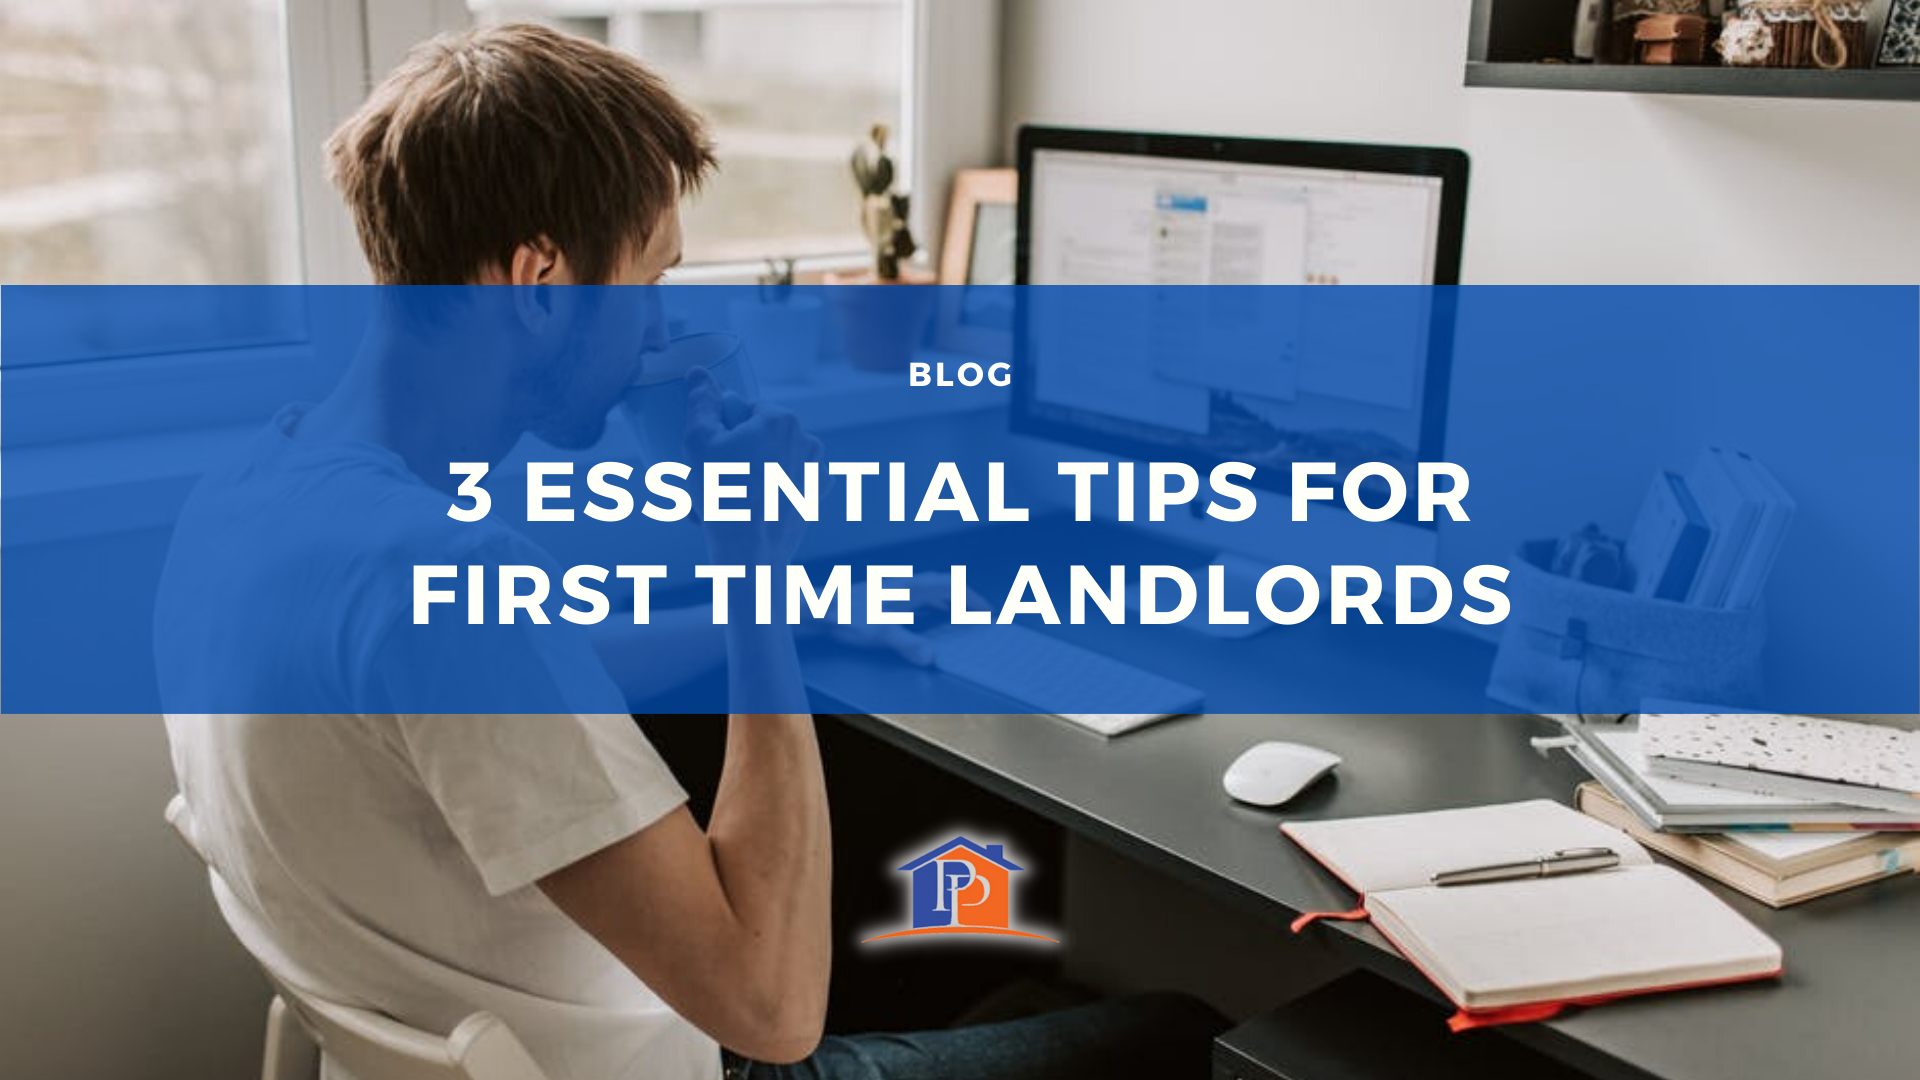 3 Essential Tips for First Time Landlords